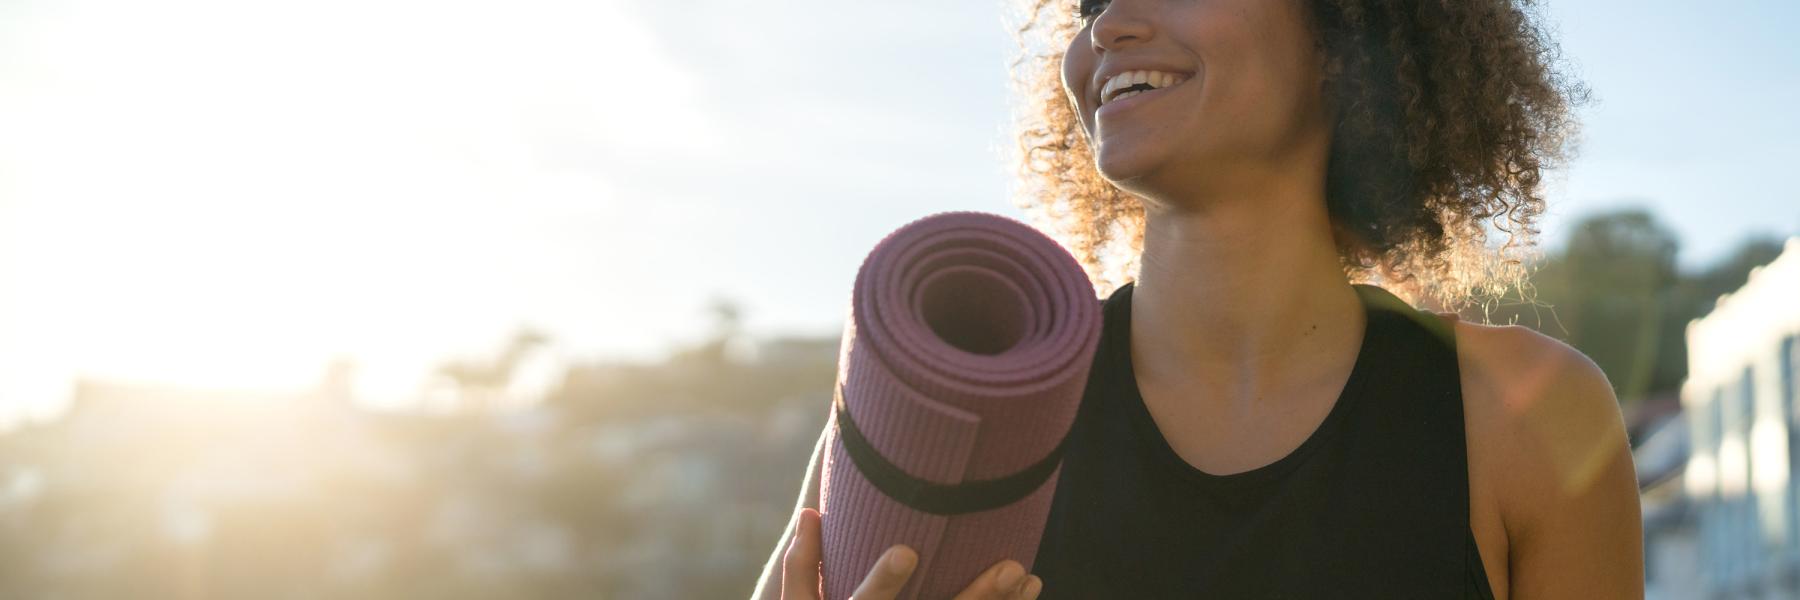 Woman holding yoga mat in exercise gear